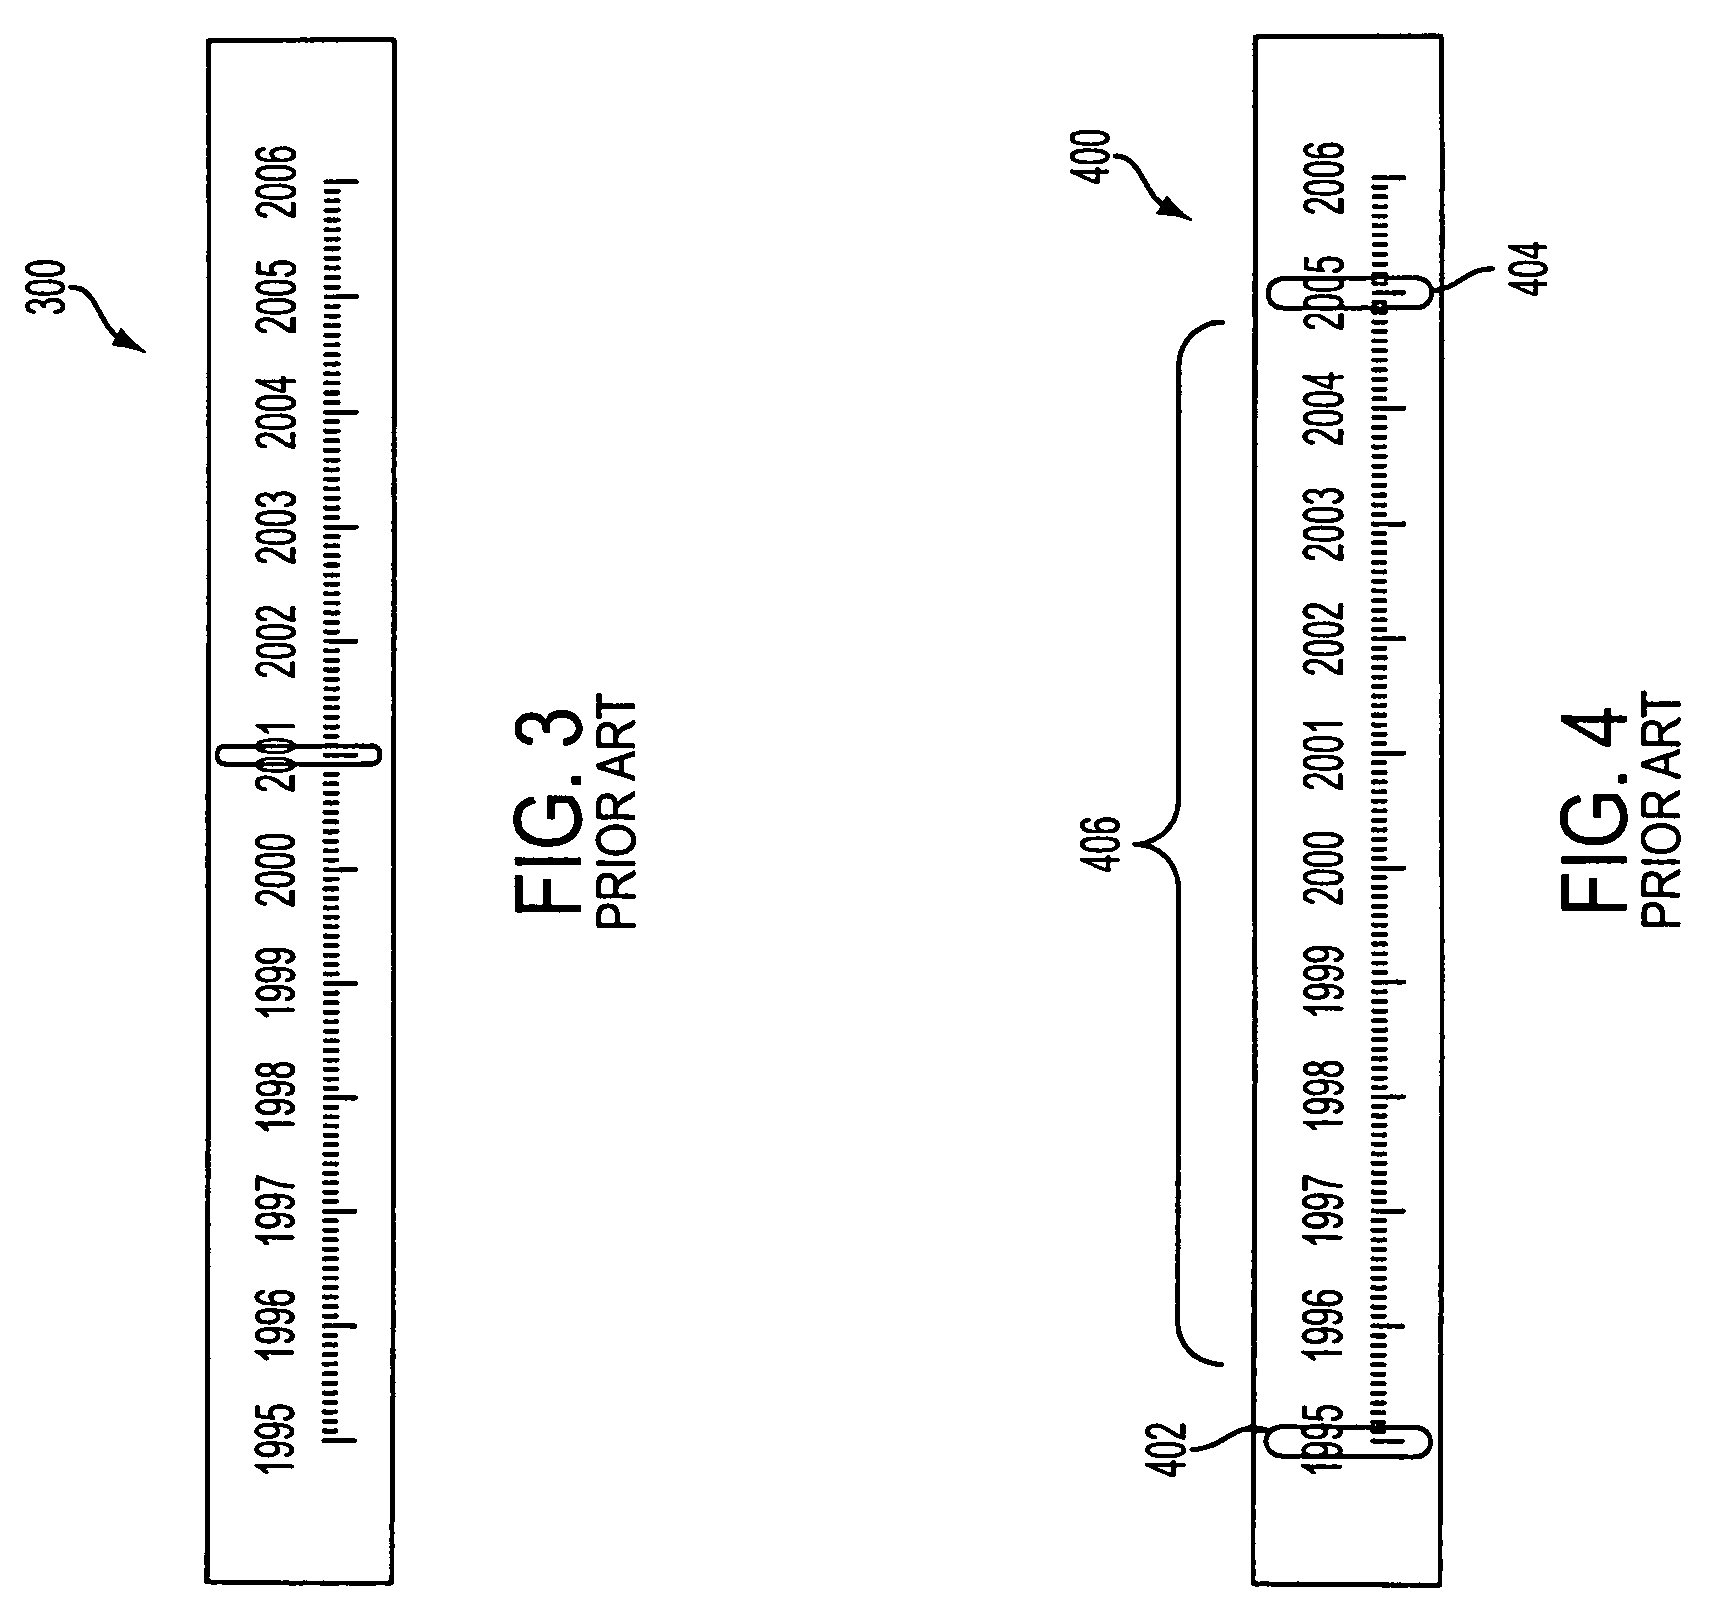 Method and apparatus of choosing ranges from a scale of values in a user interface